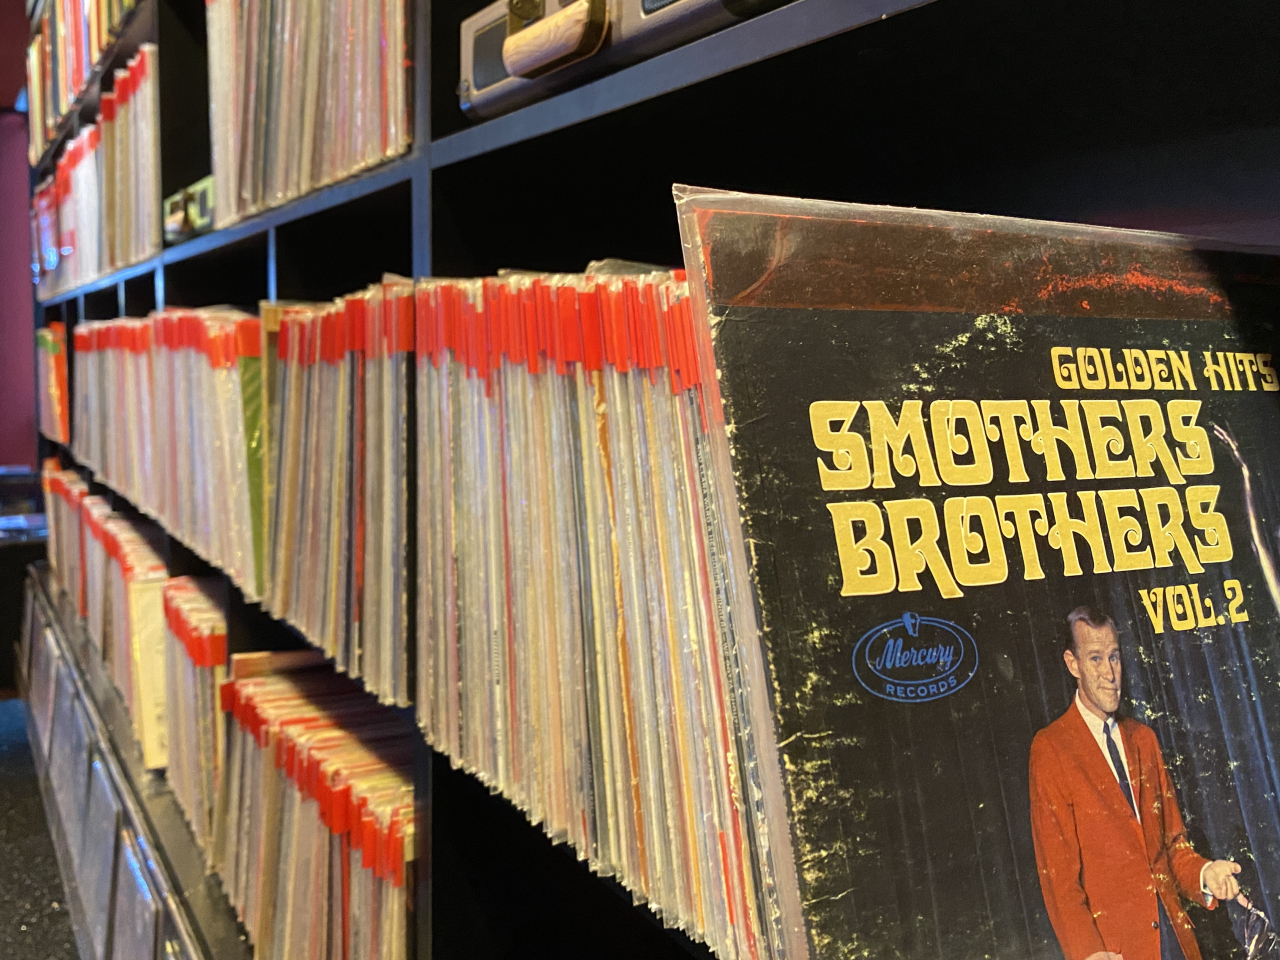 Shelves are stocked with vinyl at the Music Complex Seoul. (Hwang Joo-young/The Korea Herald)